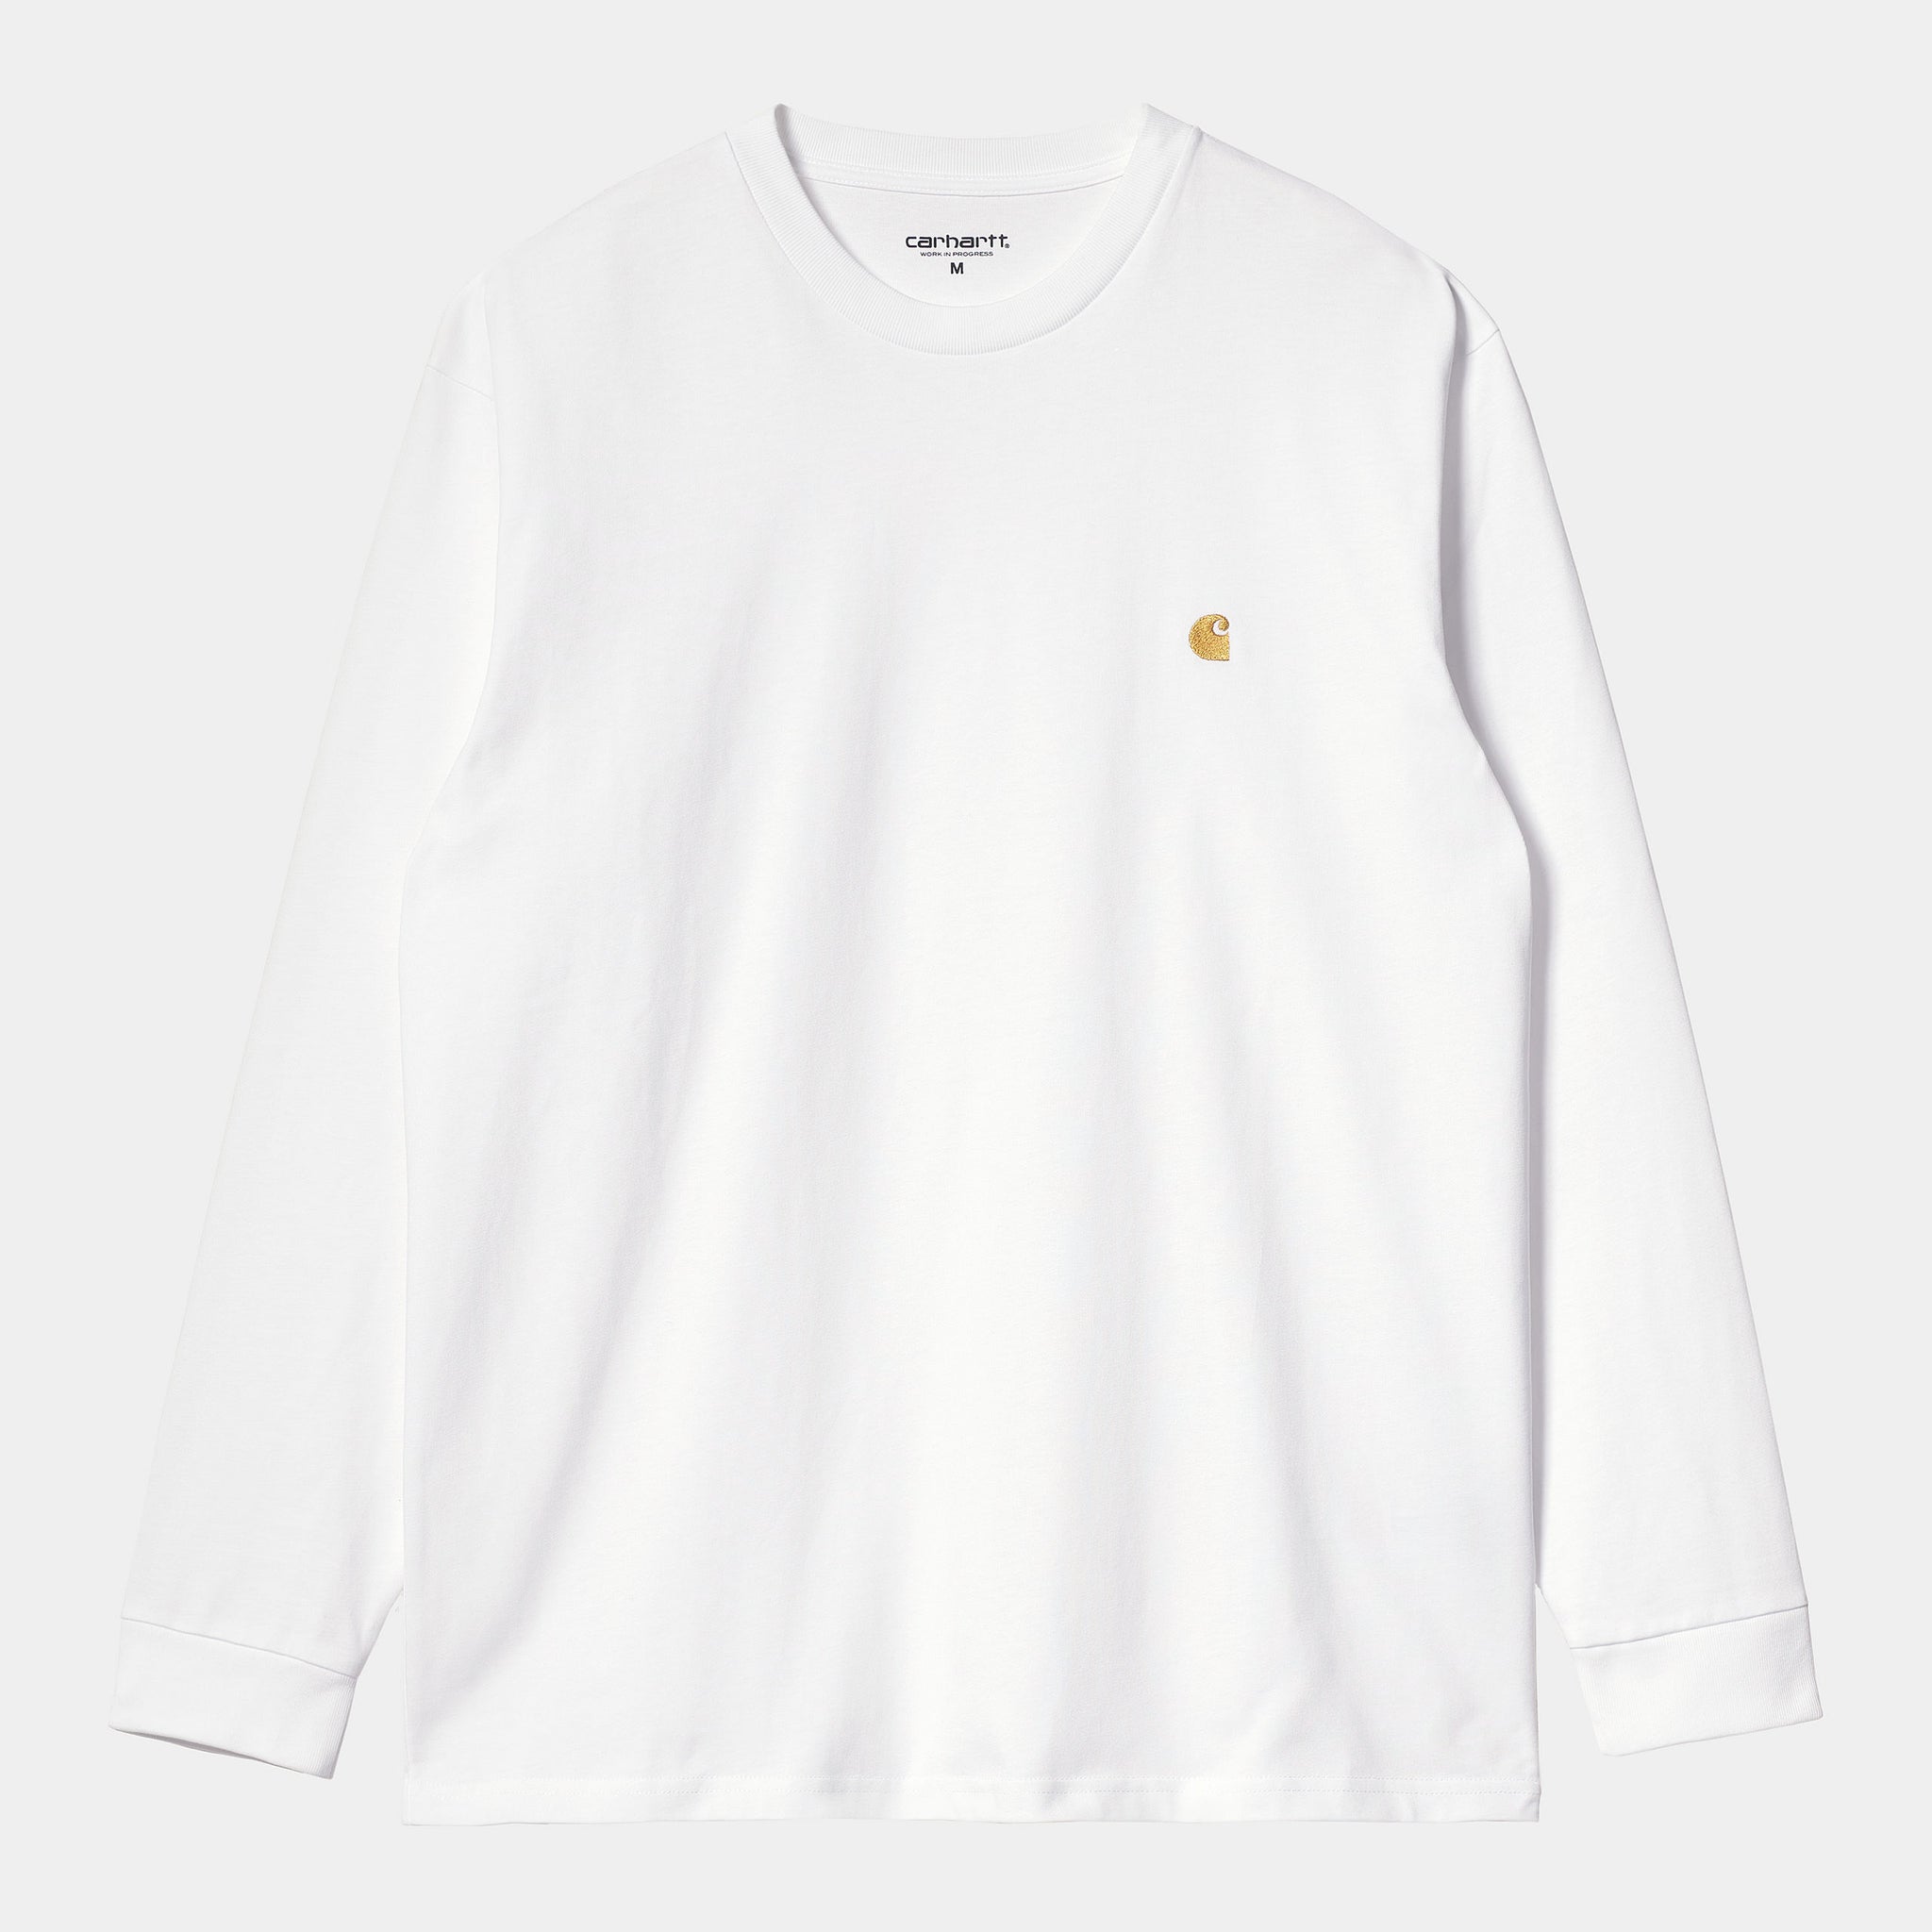 L/s Chase T-shirt 100% Cotton Combed Single Jersey, 235 G/m² (White / Gold)